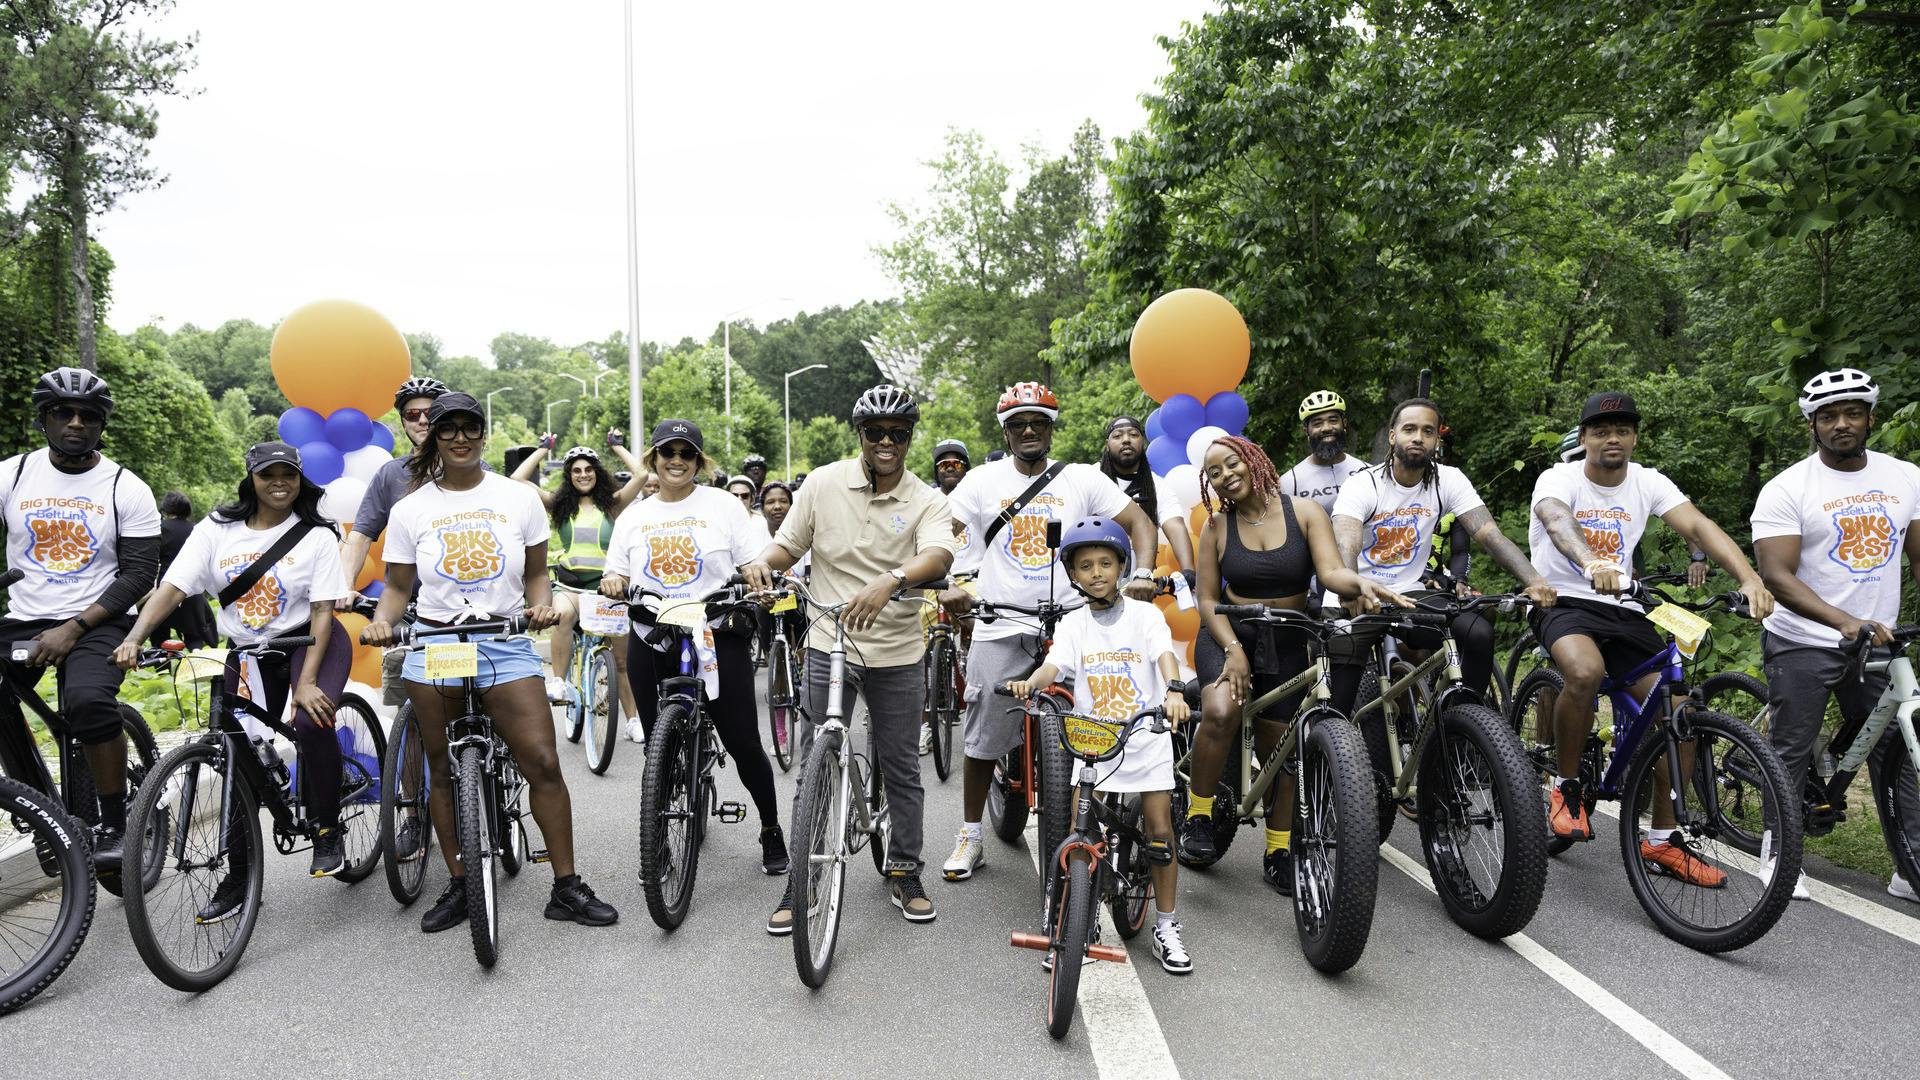 A group of people stand on their bikes smiling and ready to ride.